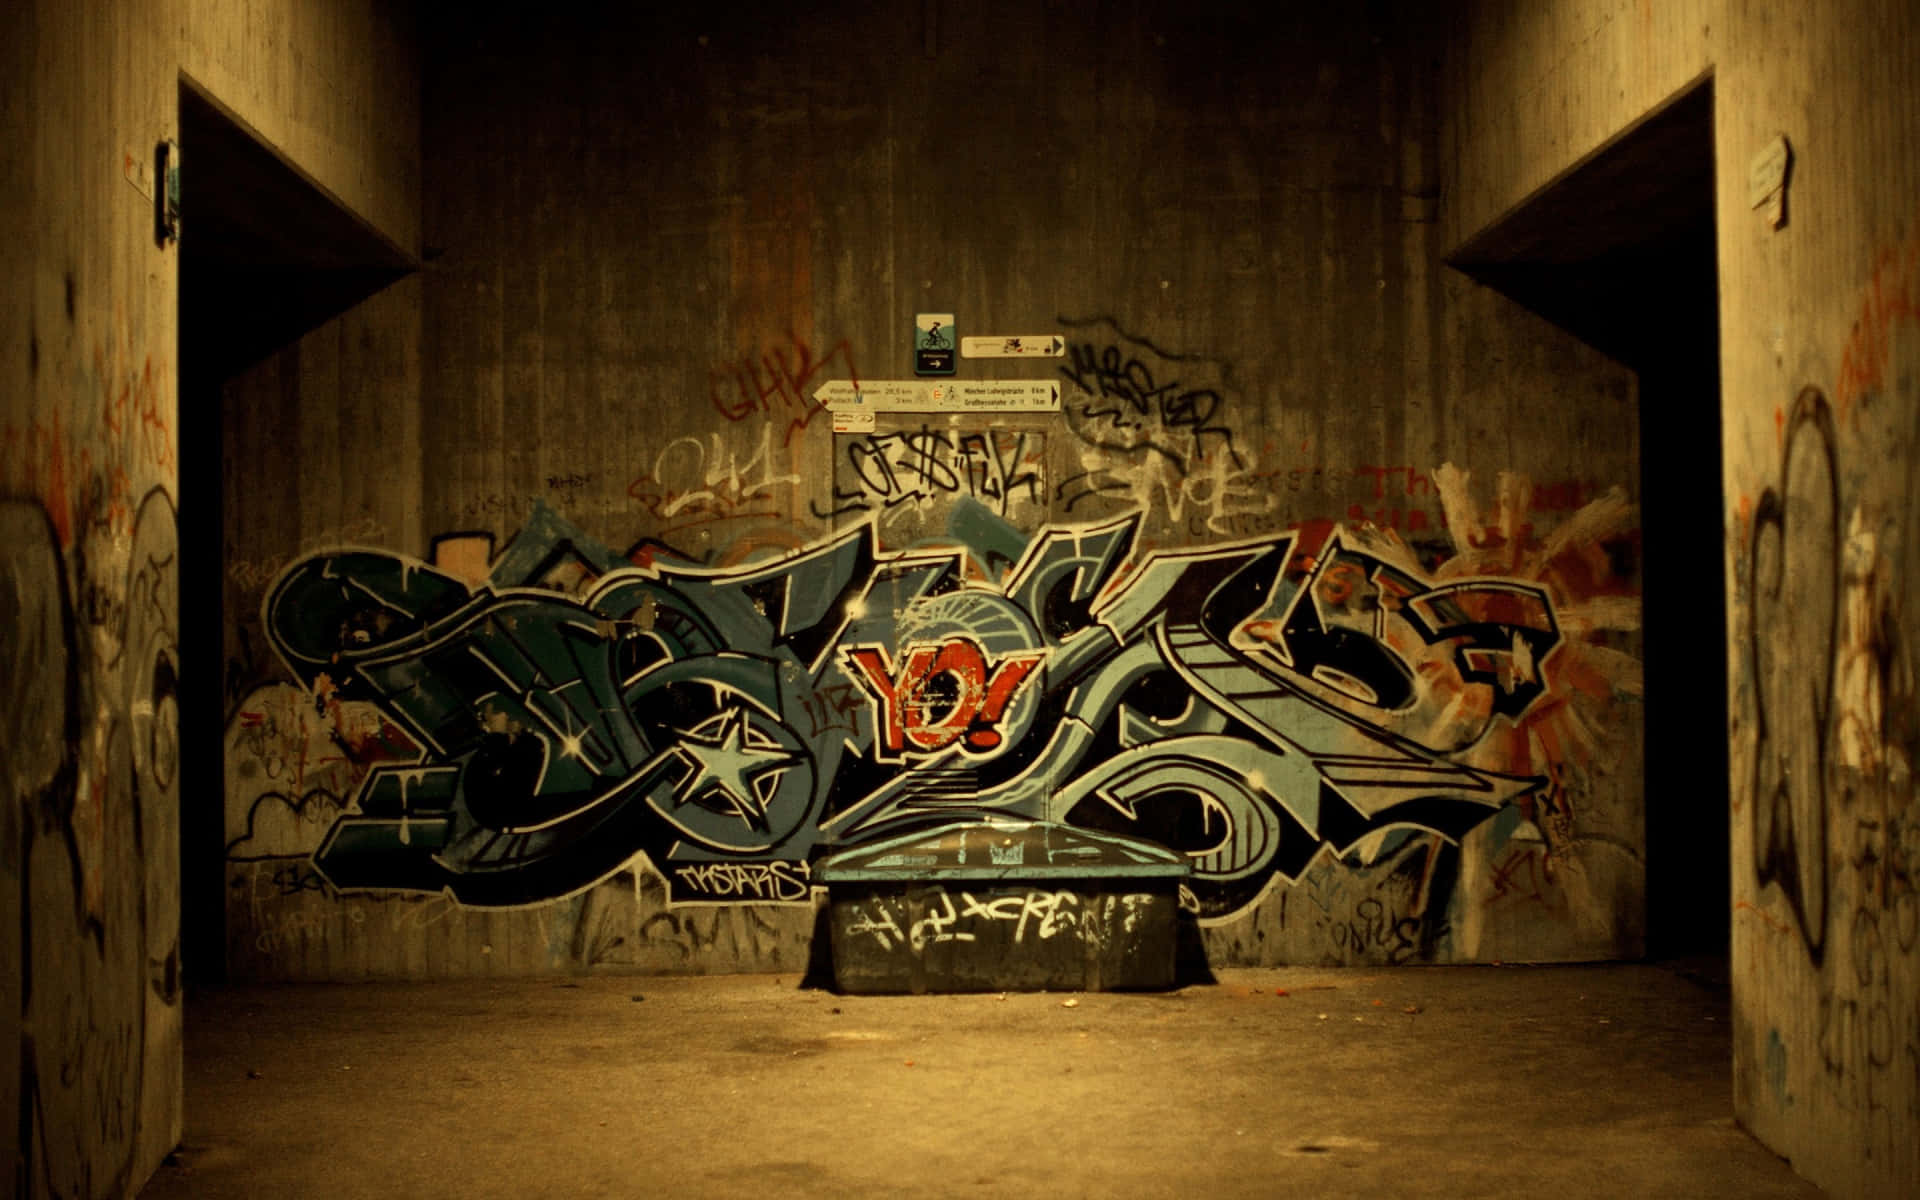 Graffiti Wall Art In An Empty Space Background